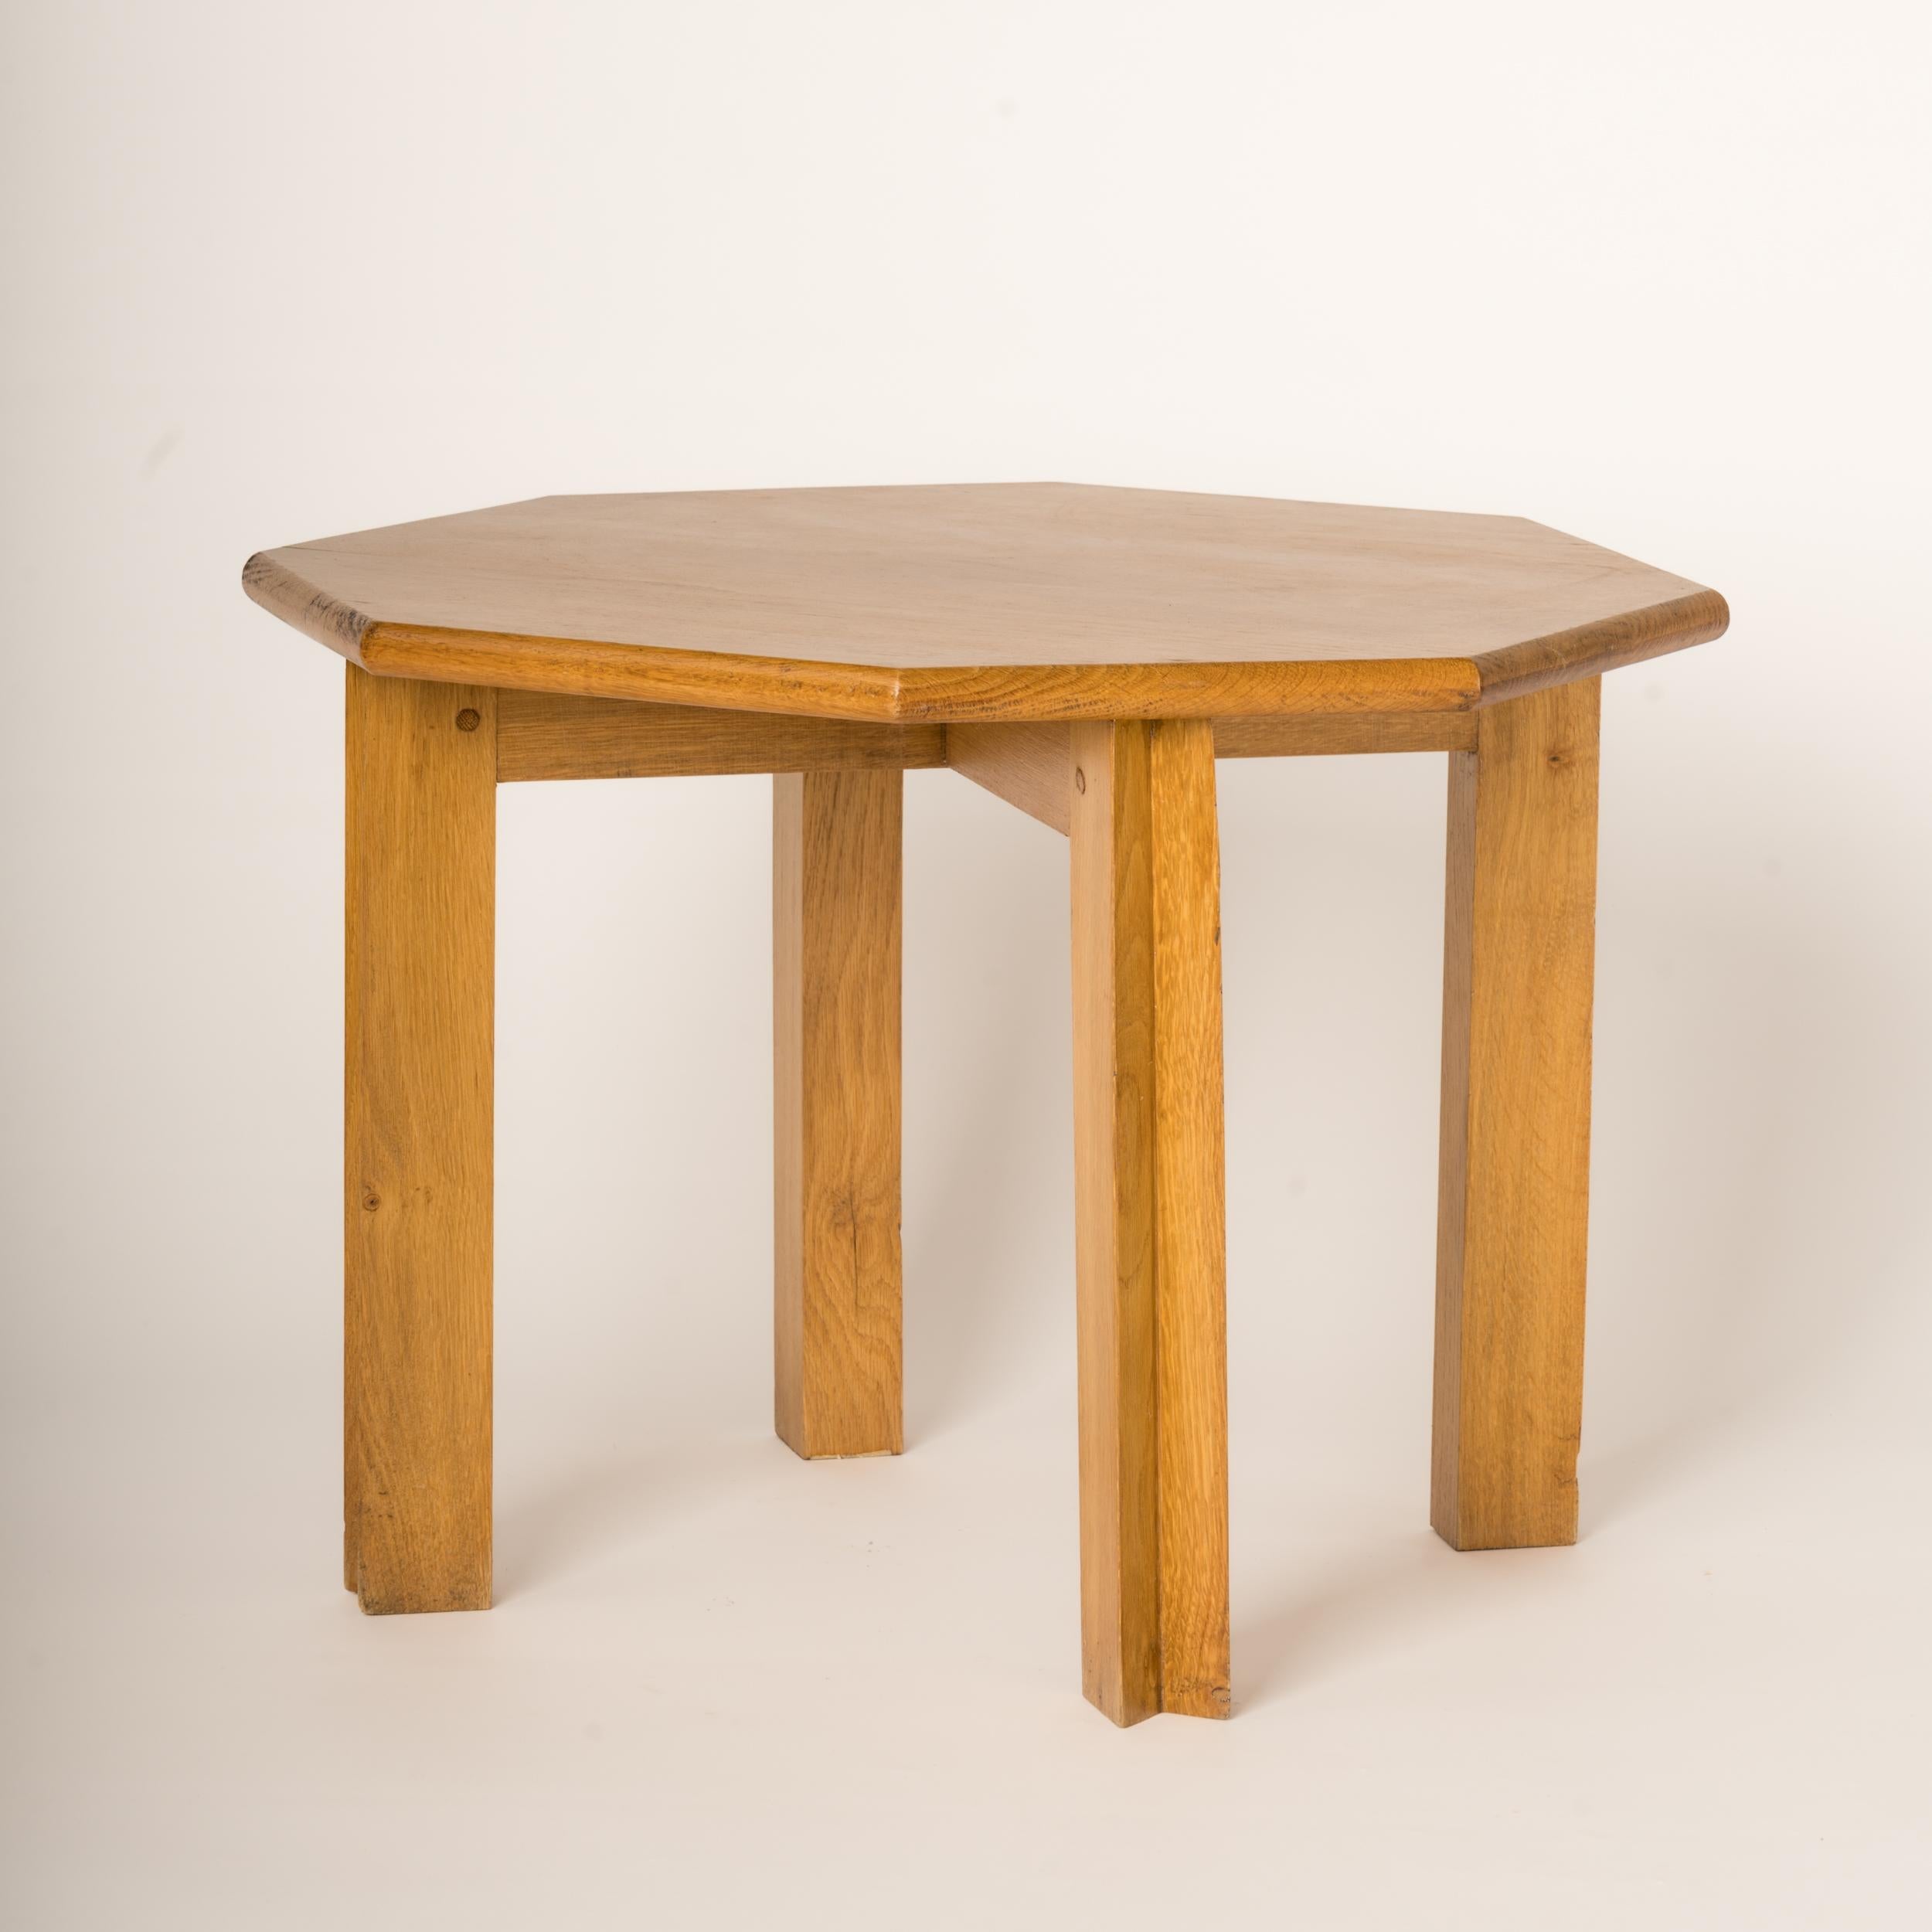 Late 20th Century Solid Oak Minimalist Side Table with Scultpted Legs, France, 1970's For Sale